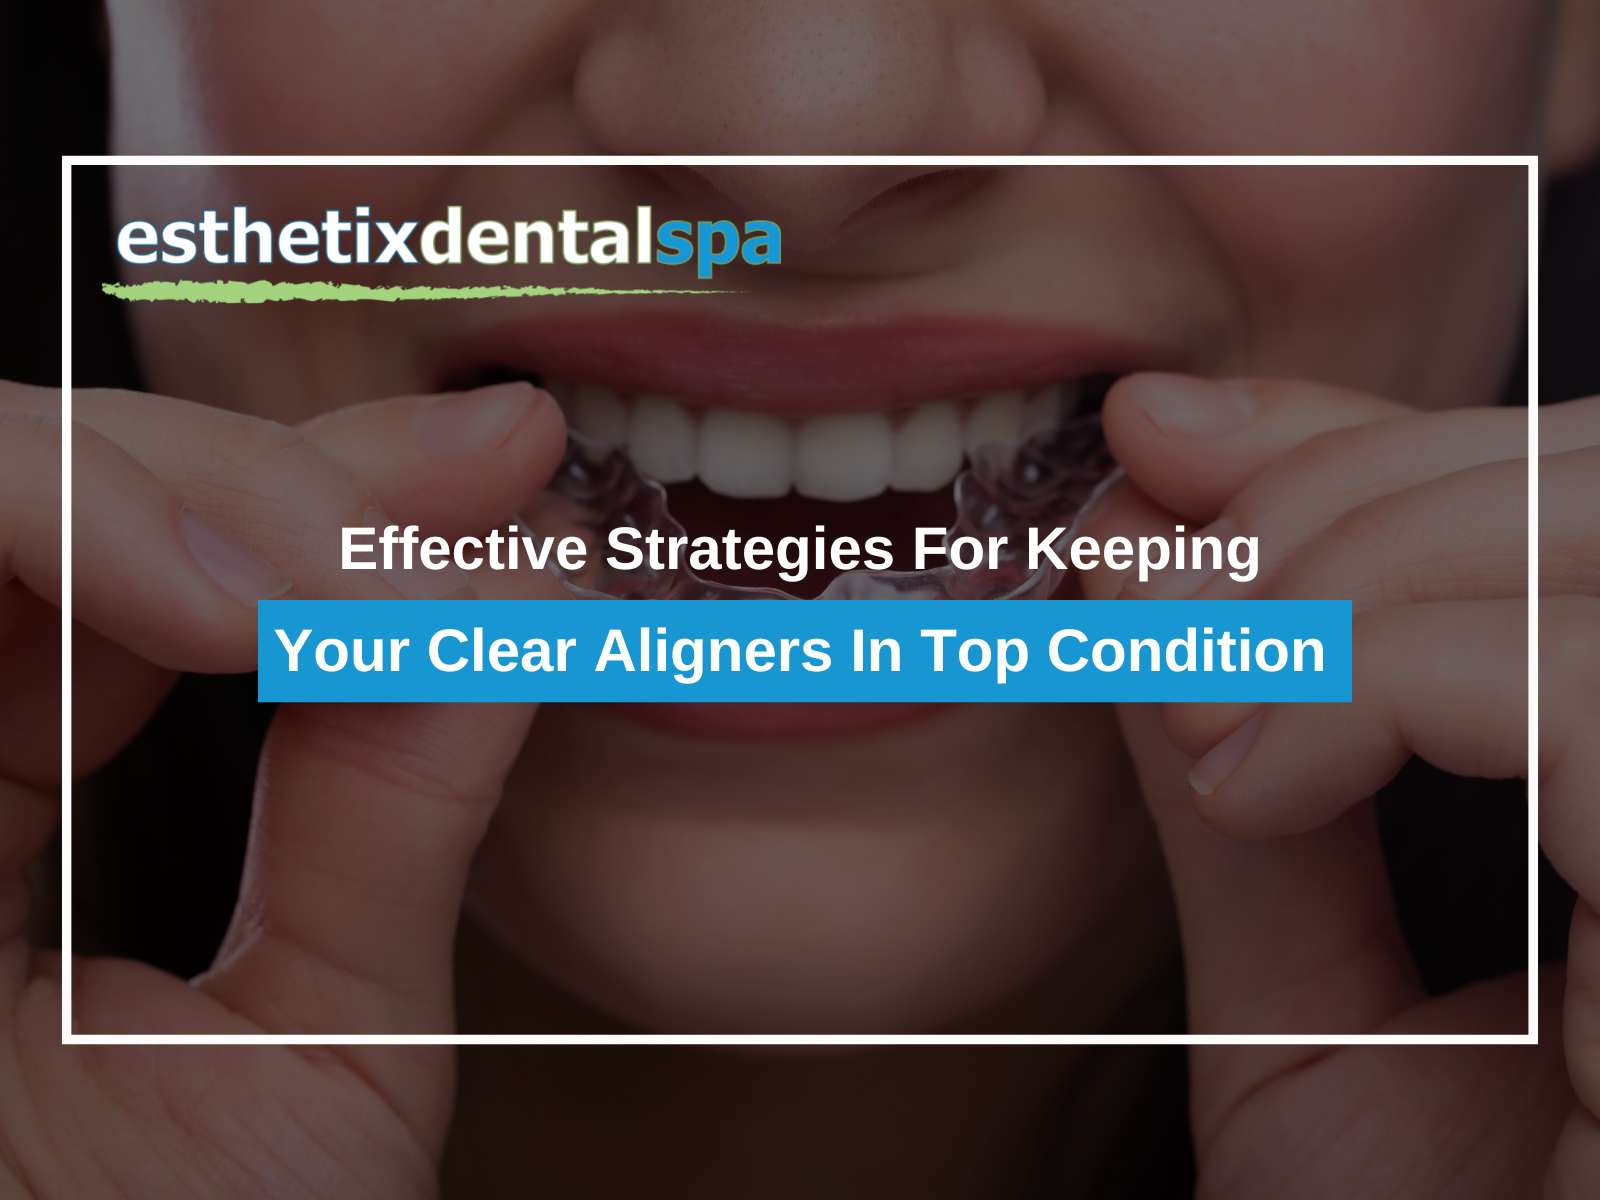 Effective Strategies For Keeping Your Clear Aligners In Top Condition